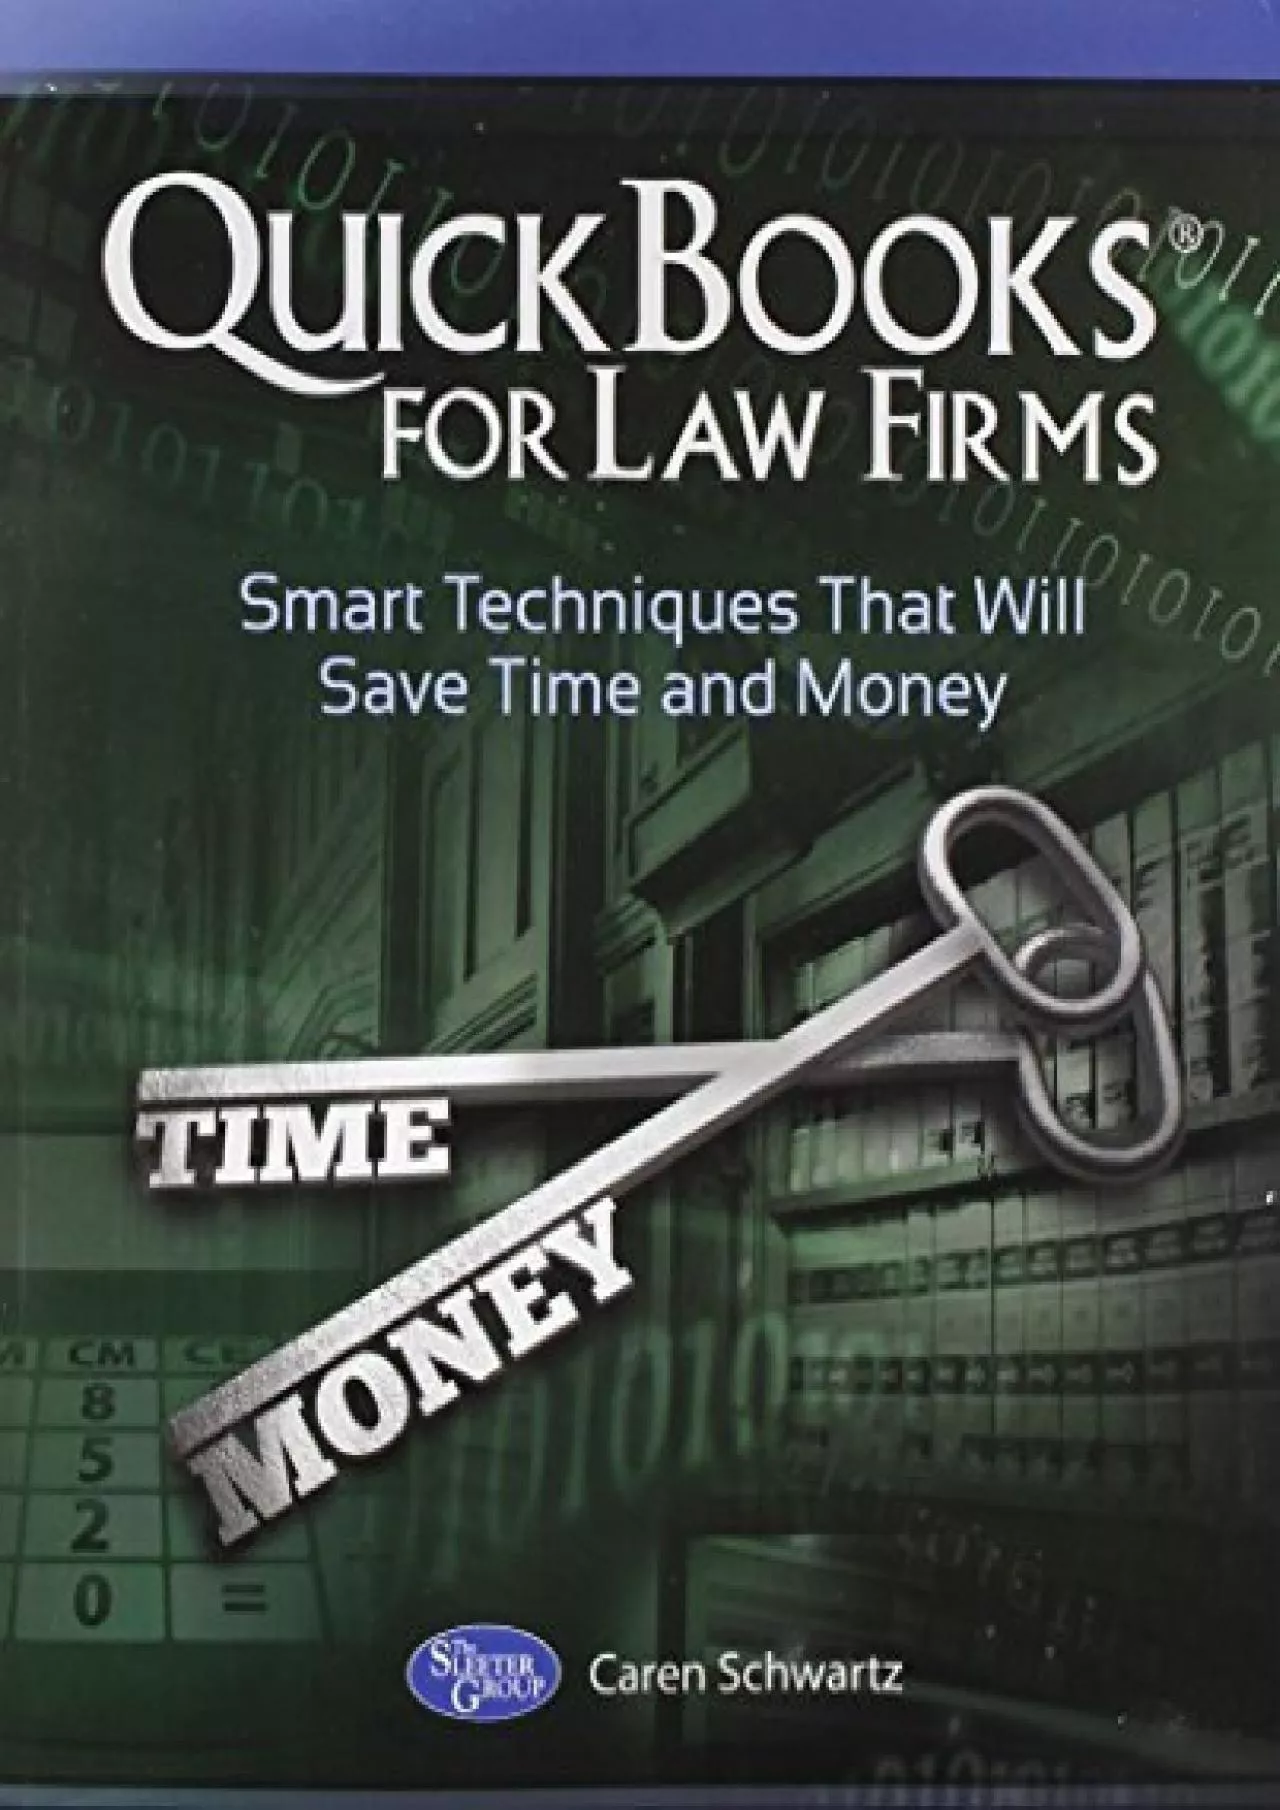 (DOWNLOAD)-QuickBooks for Law Firms: Smart Techniques That Will Save Time and Money by